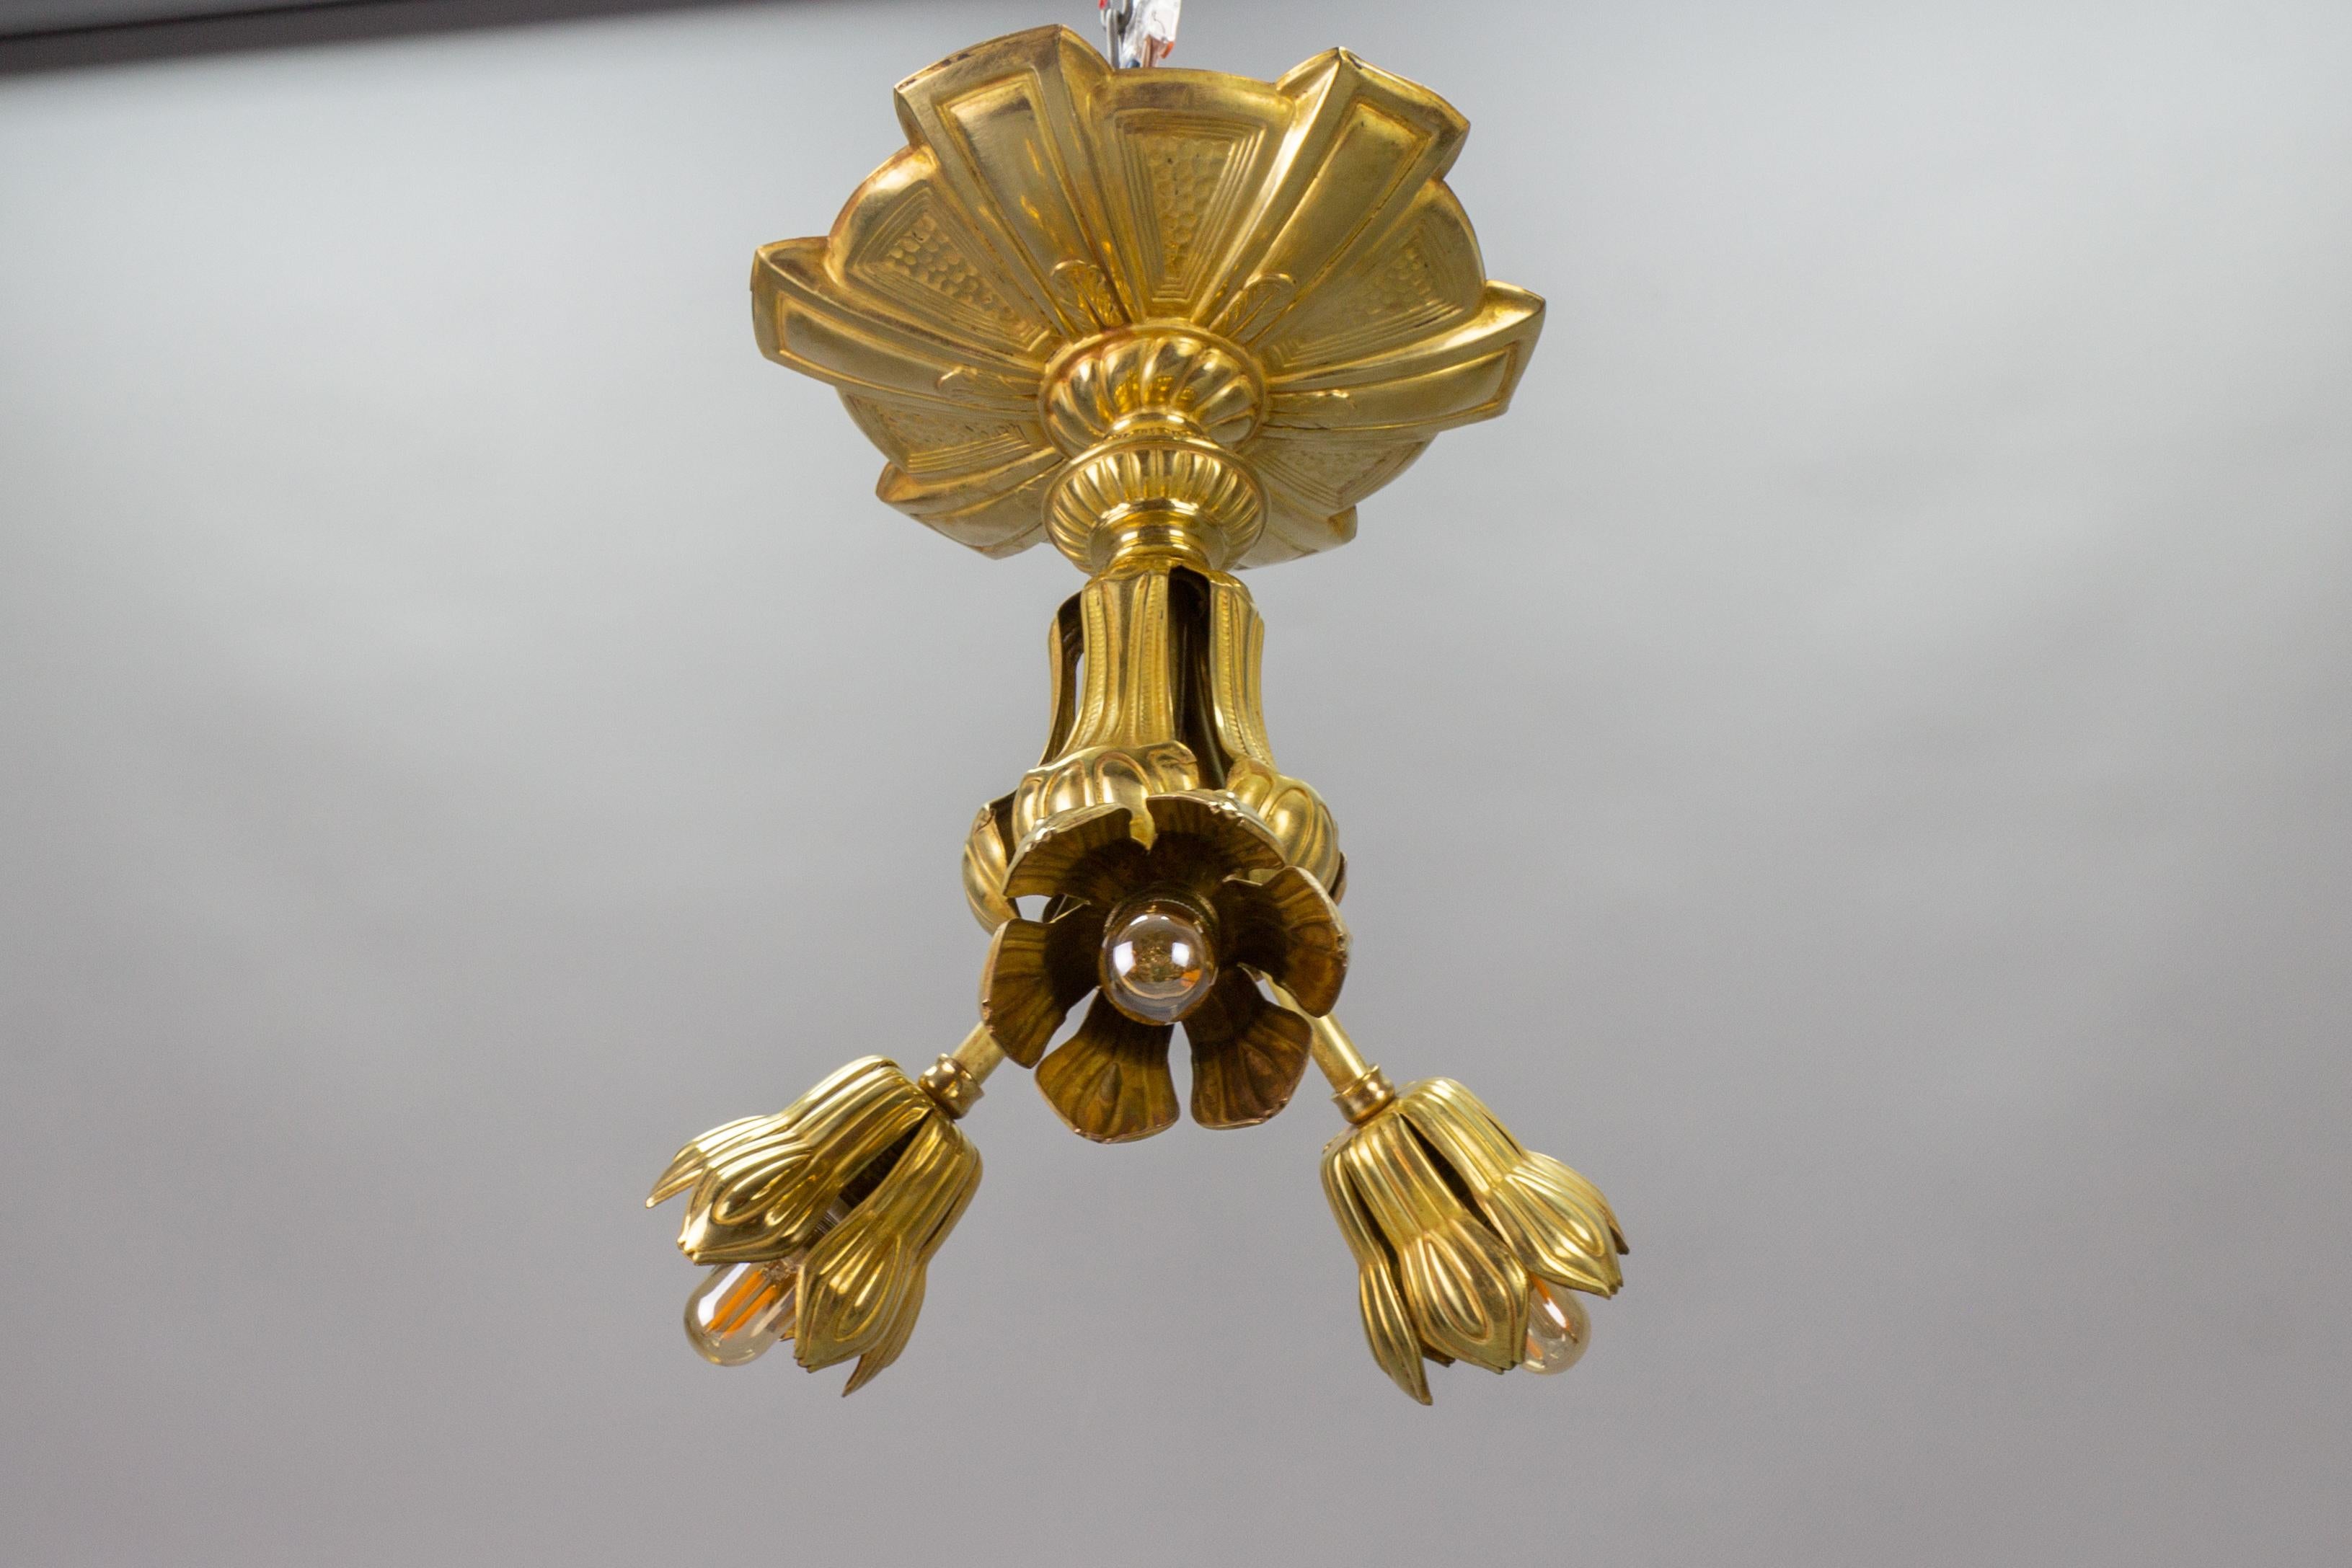  French Art Deco Three-Light Brass Ceiling Light Fixture, 1920s For Sale 6